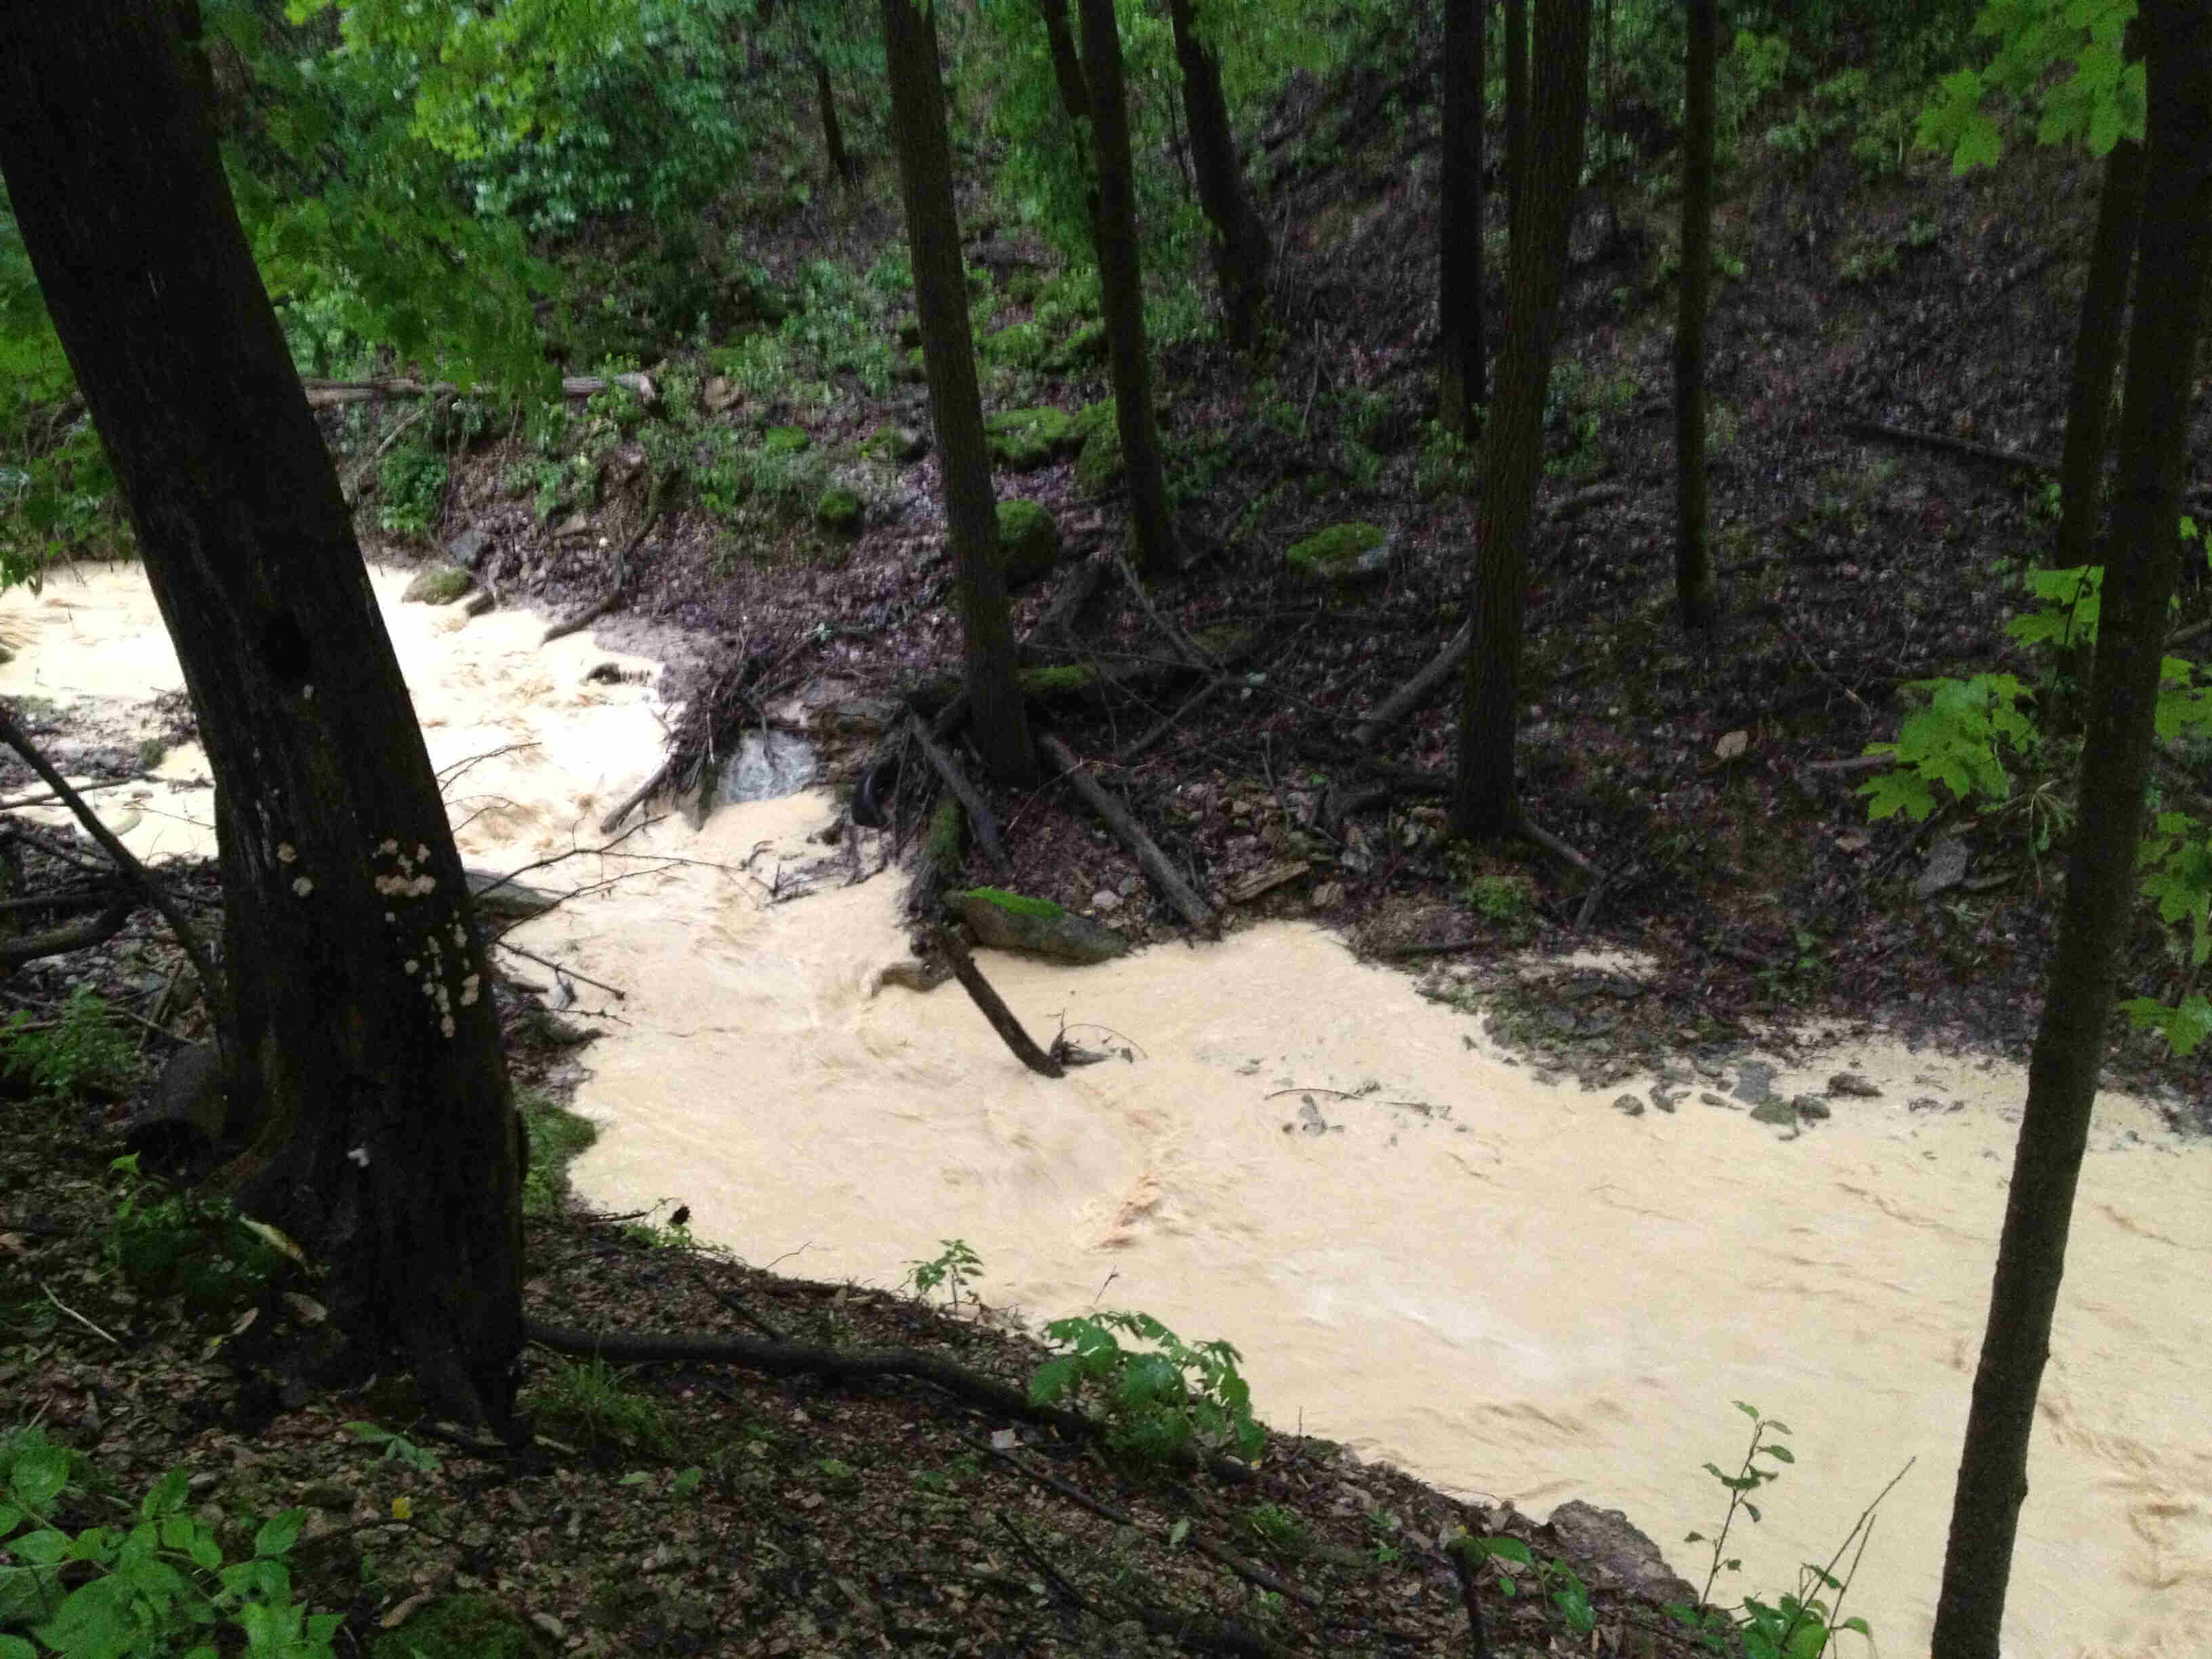 Downward view of a muddy flooded stream, flowing through the rain-soaked woods